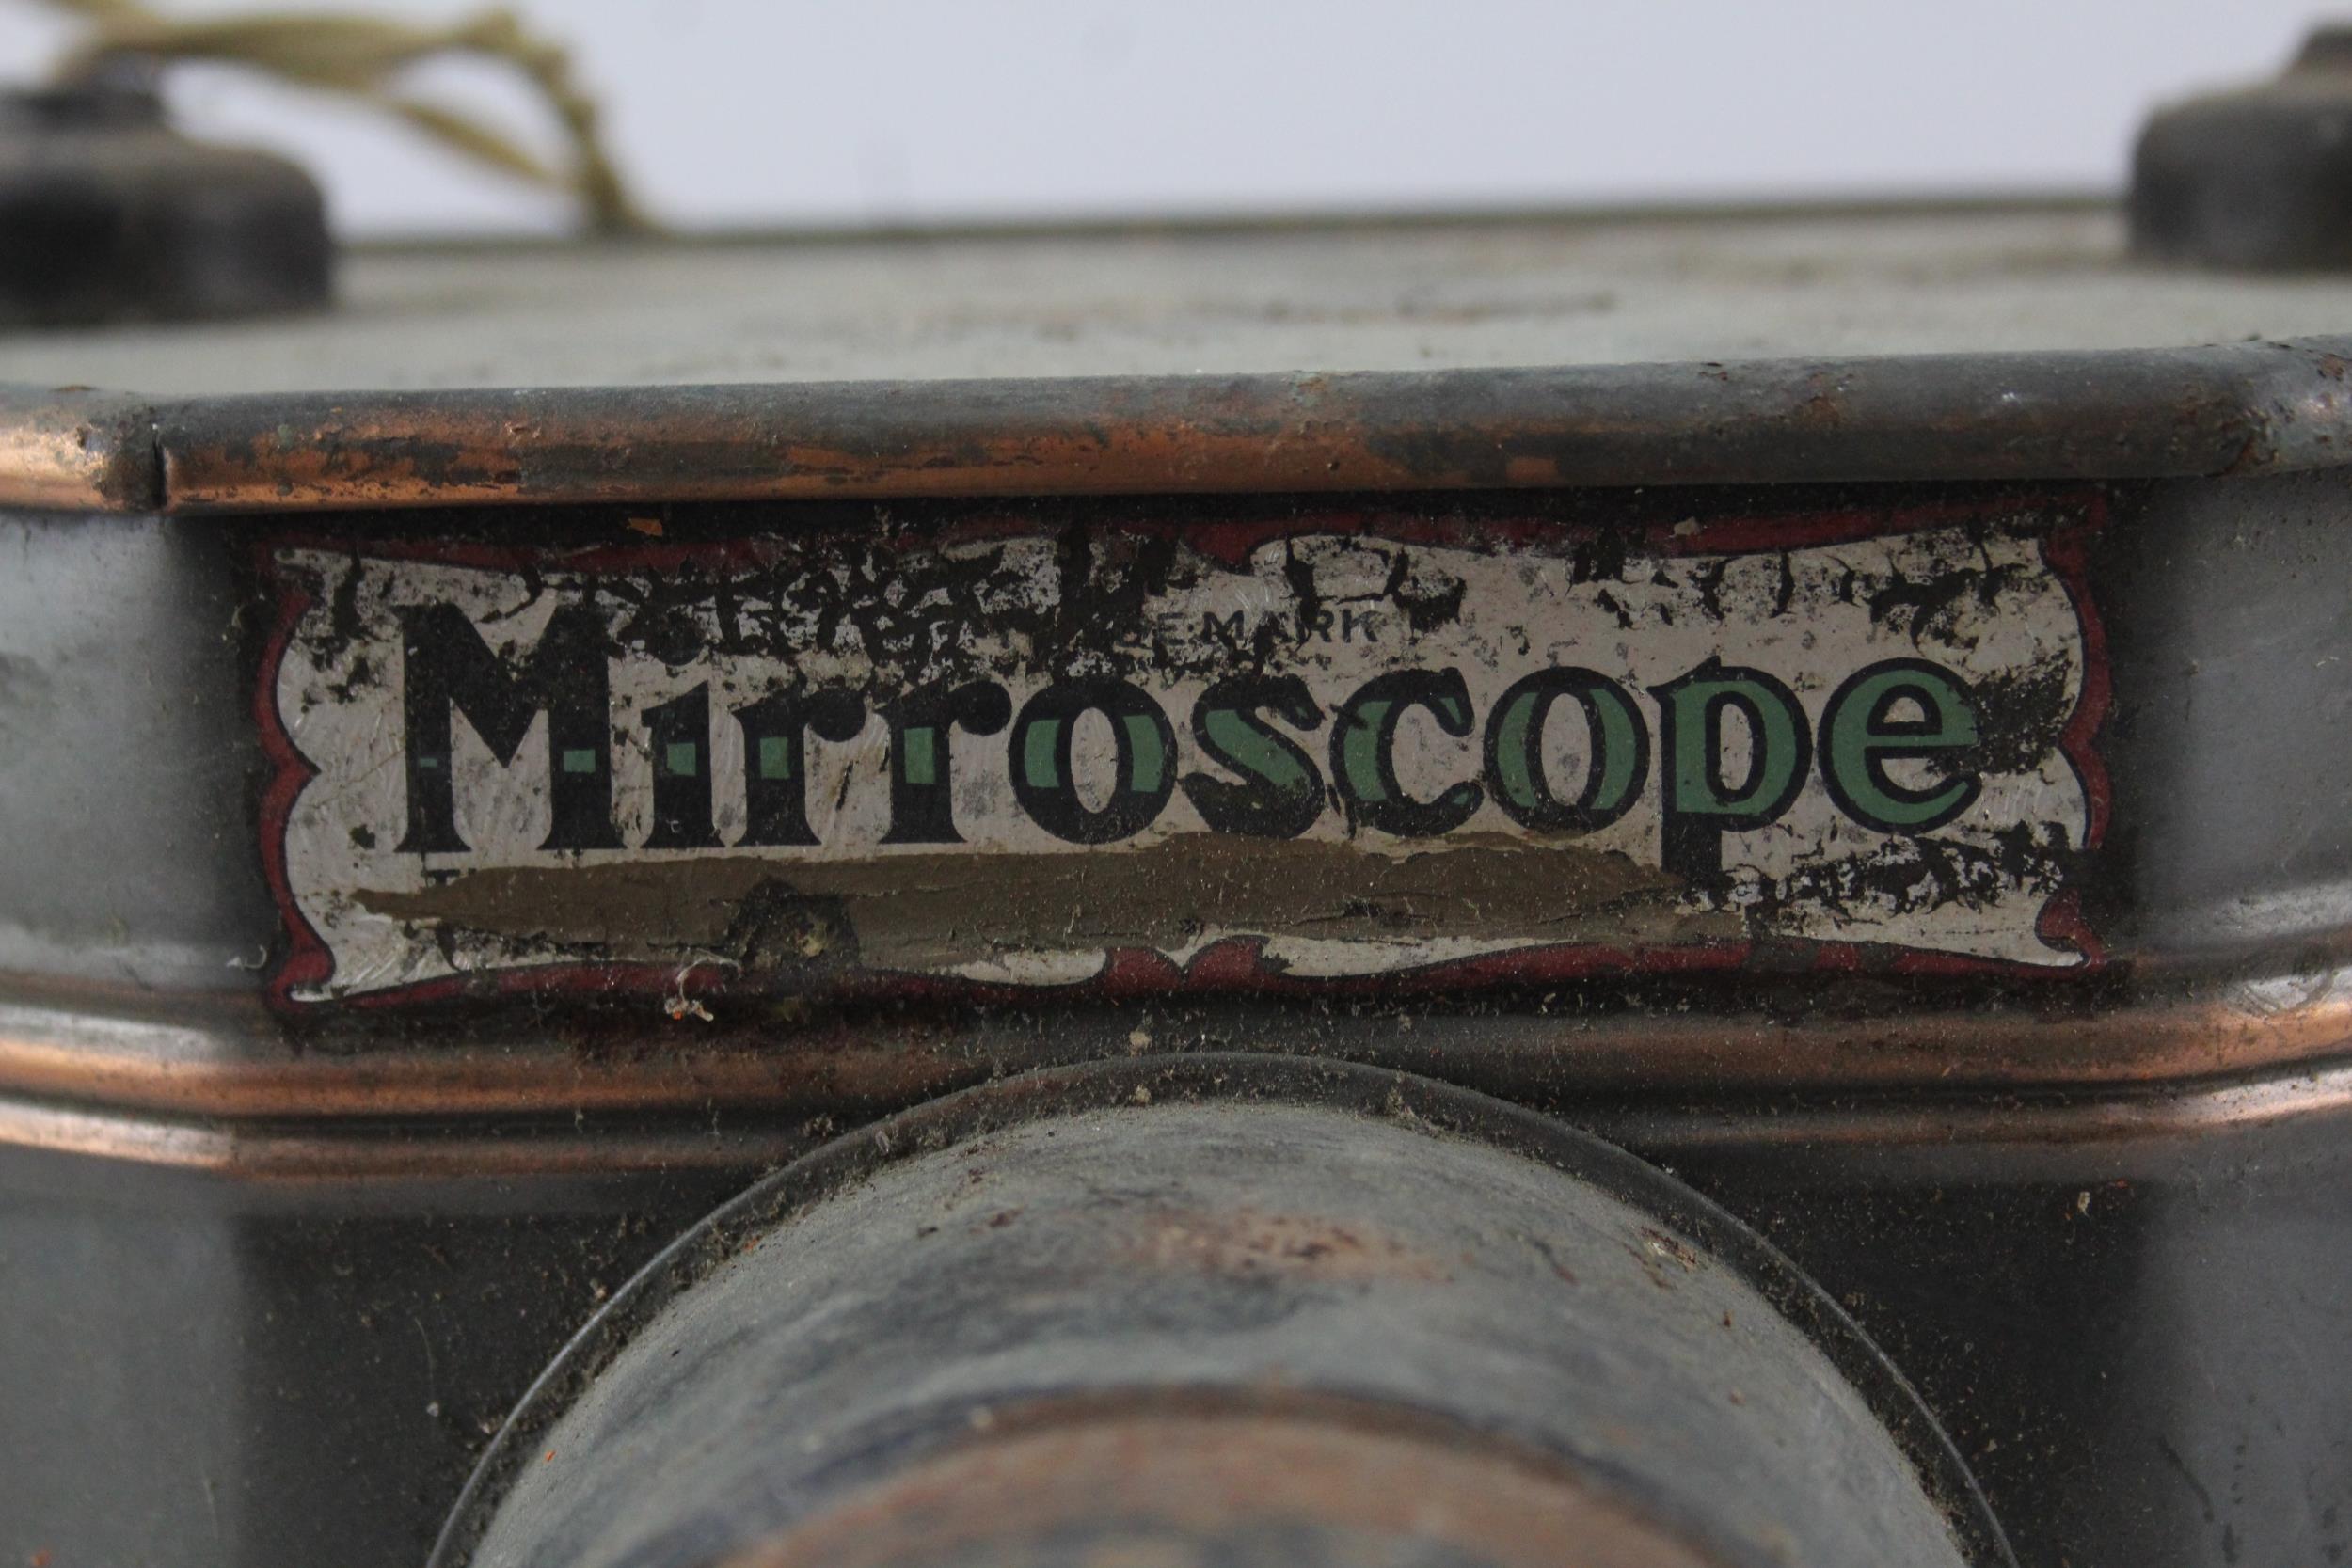 Antique Mirrorscope Projector 1911 - Antique Mirrorscope Projector 1911 No Latch On Back Bulb - Image 2 of 4